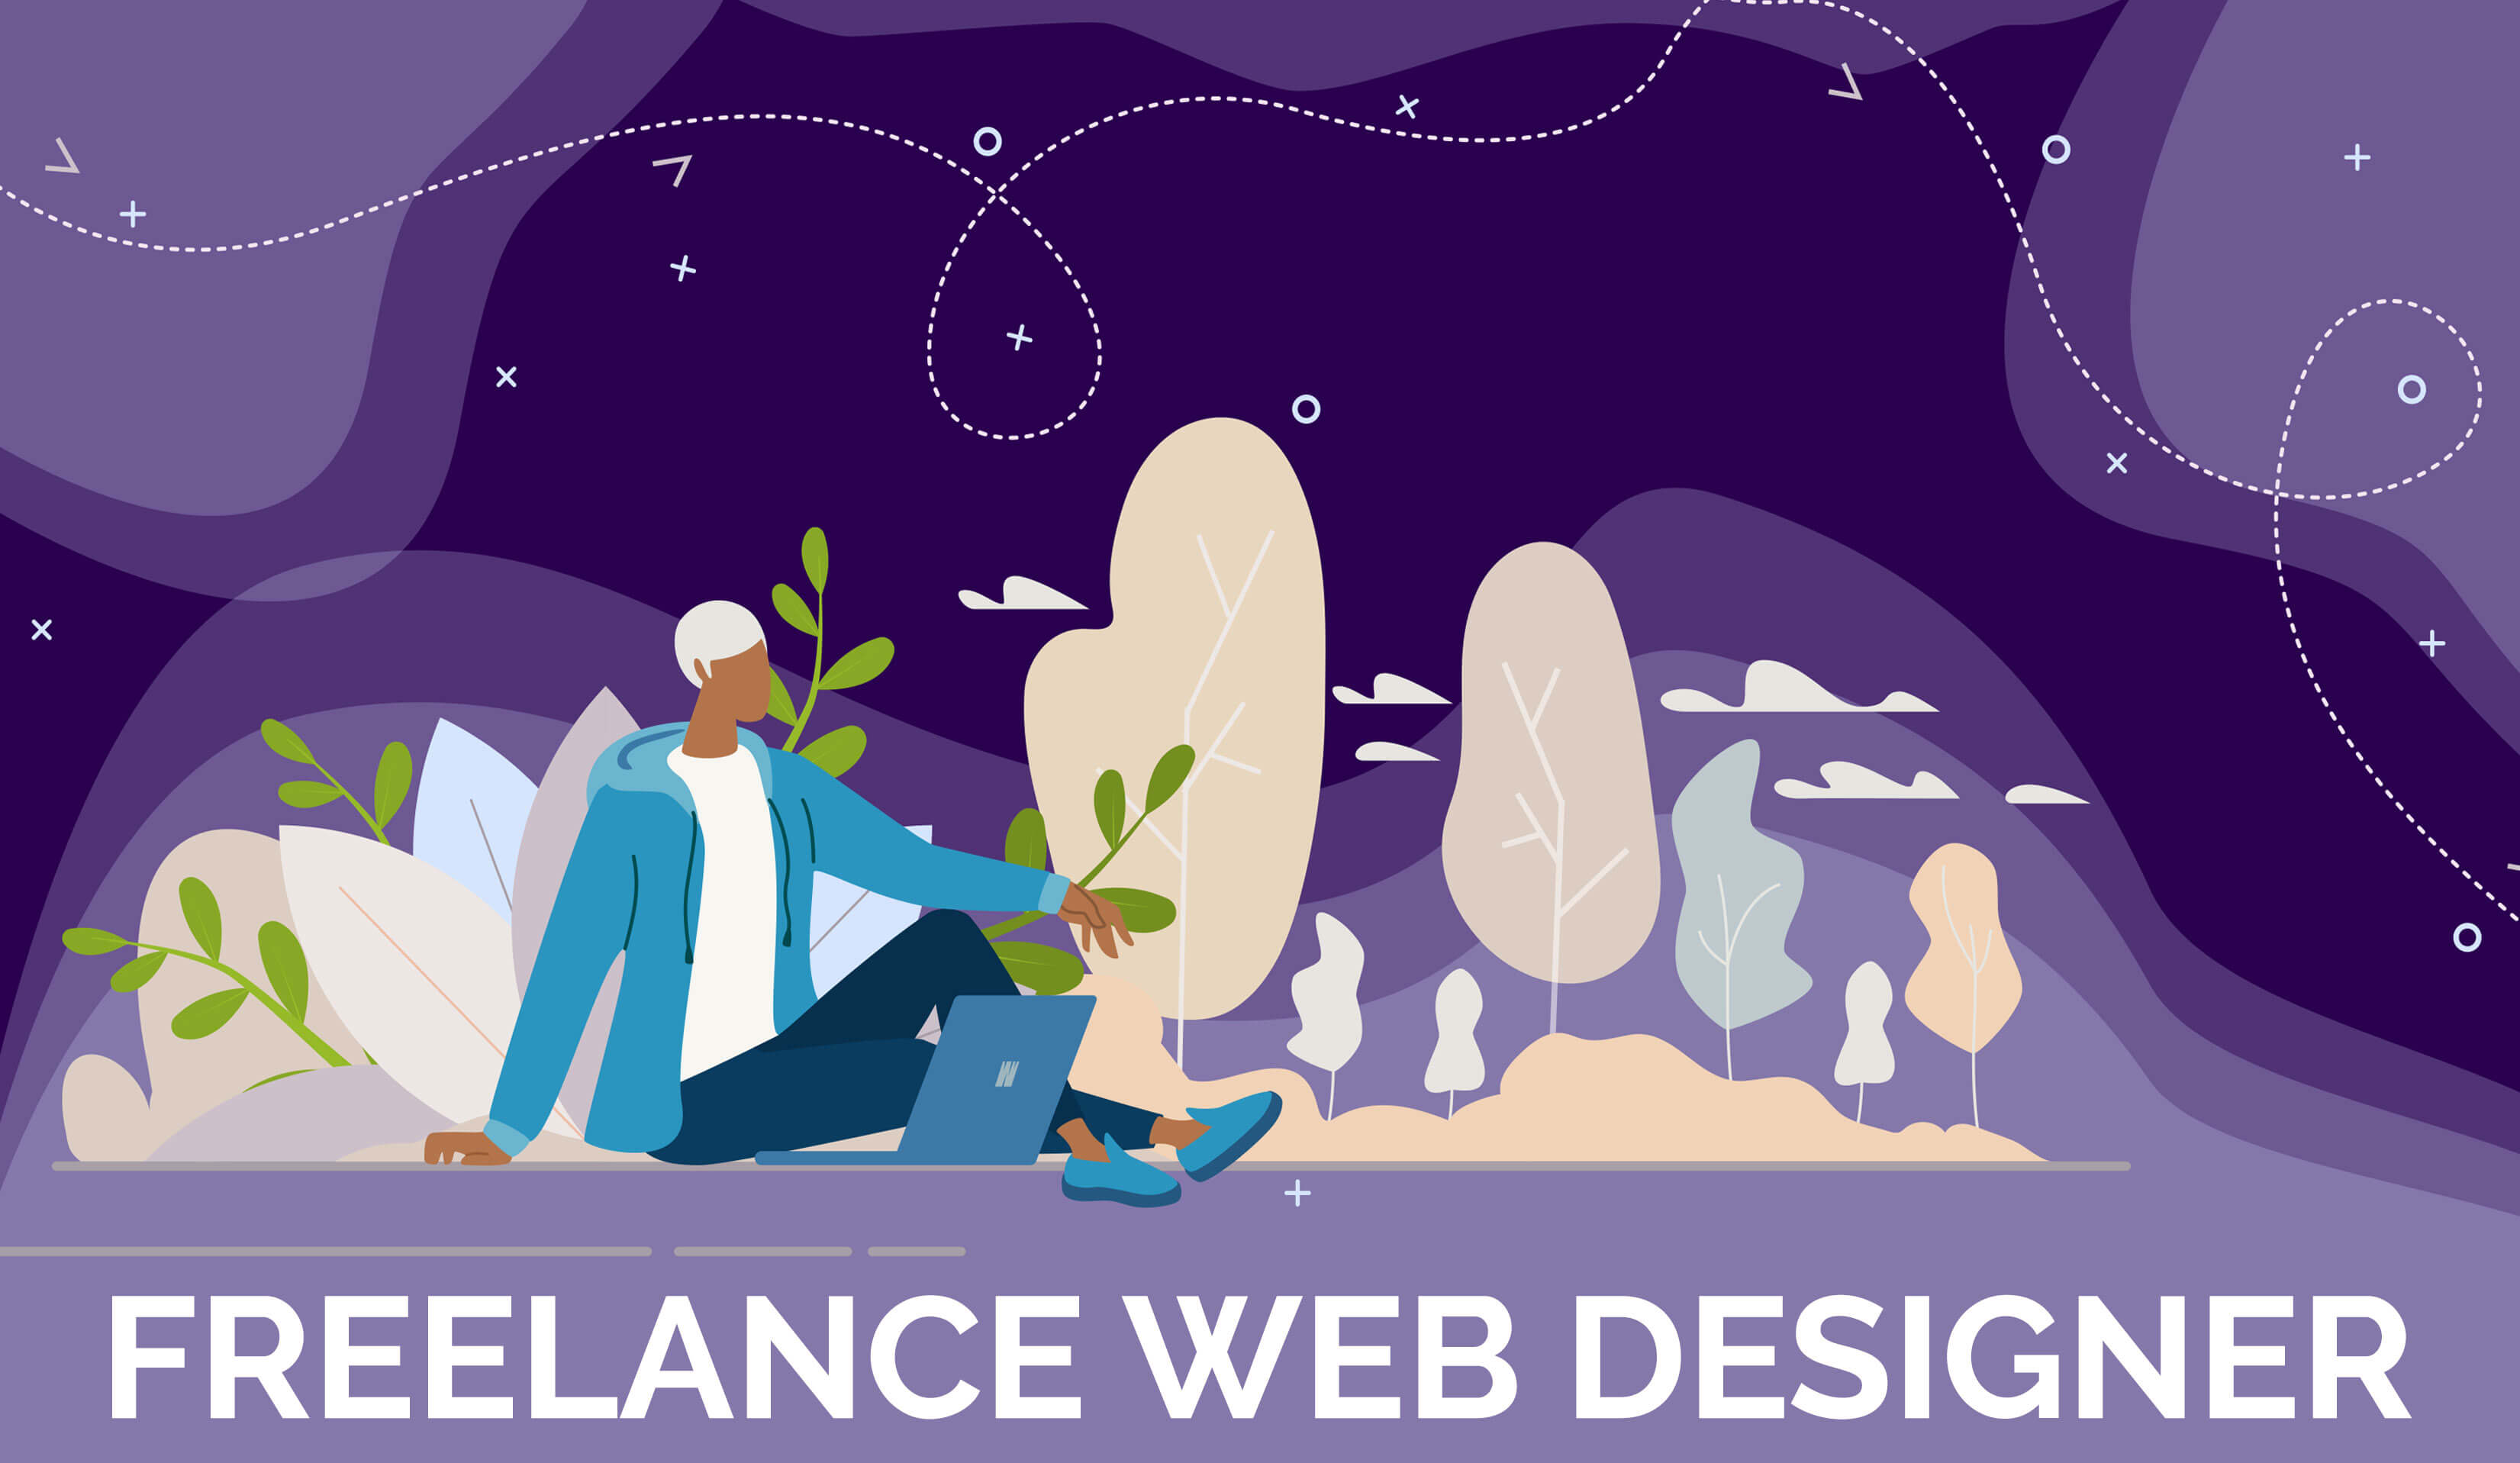 How to Hire and Work with the Best Freelance Web Developer and Designers?